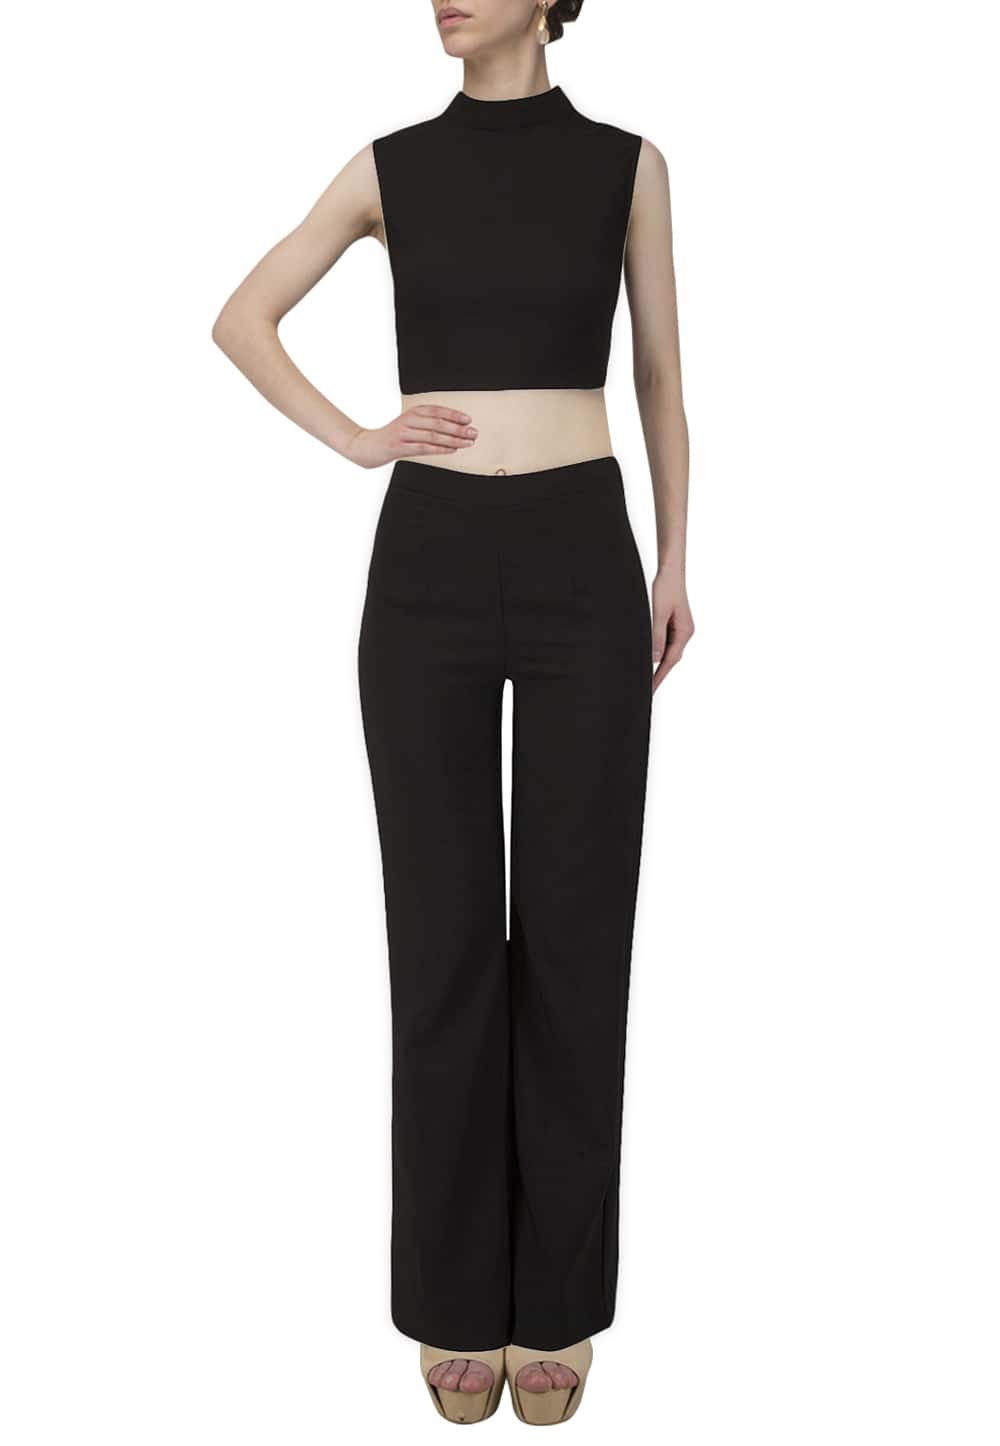 Crop top with pants and shrug | Classy Missy by Gur